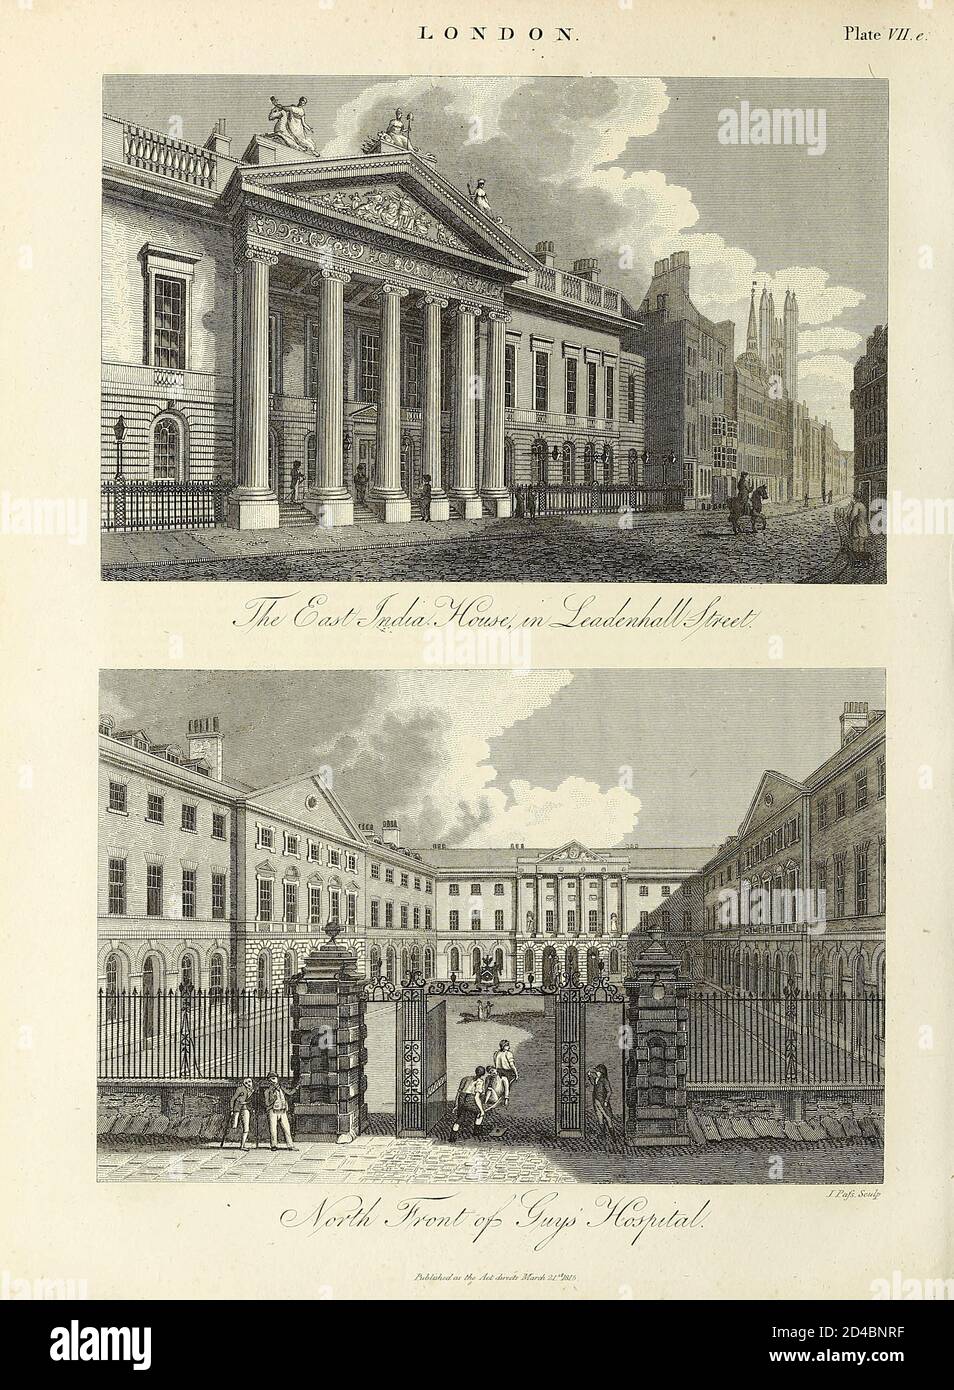 East India House (top) and Guy's Hospital, London  Architecture in the City of London Copperplate engraving From the Encyclopaedia Londinensis or, Universal dictionary of arts, sciences, and literature; Volume XIII;  Edited by Wilkes, John. Published in London in 1815 Stock Photo